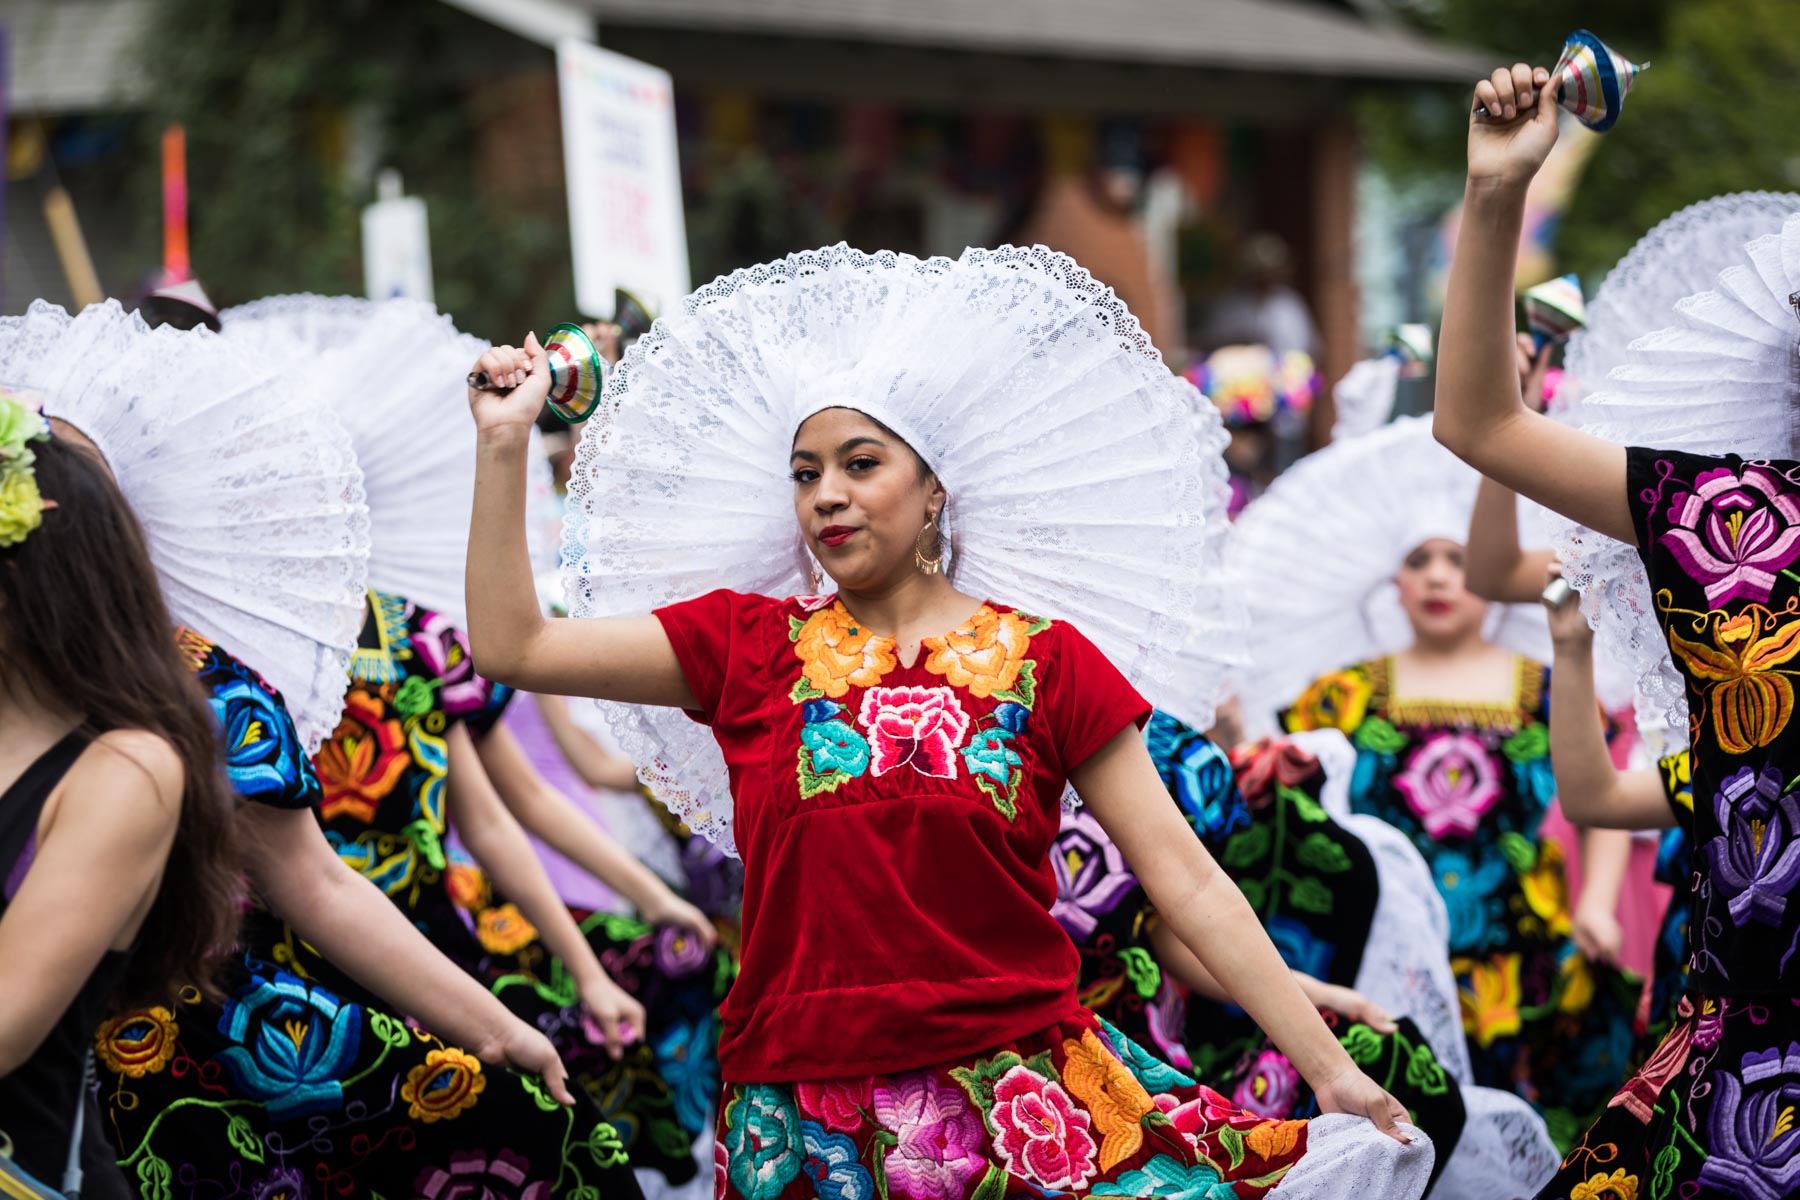 Woman dancing with white hair adornment and colorful dress for an article on the Fiesta photo tips